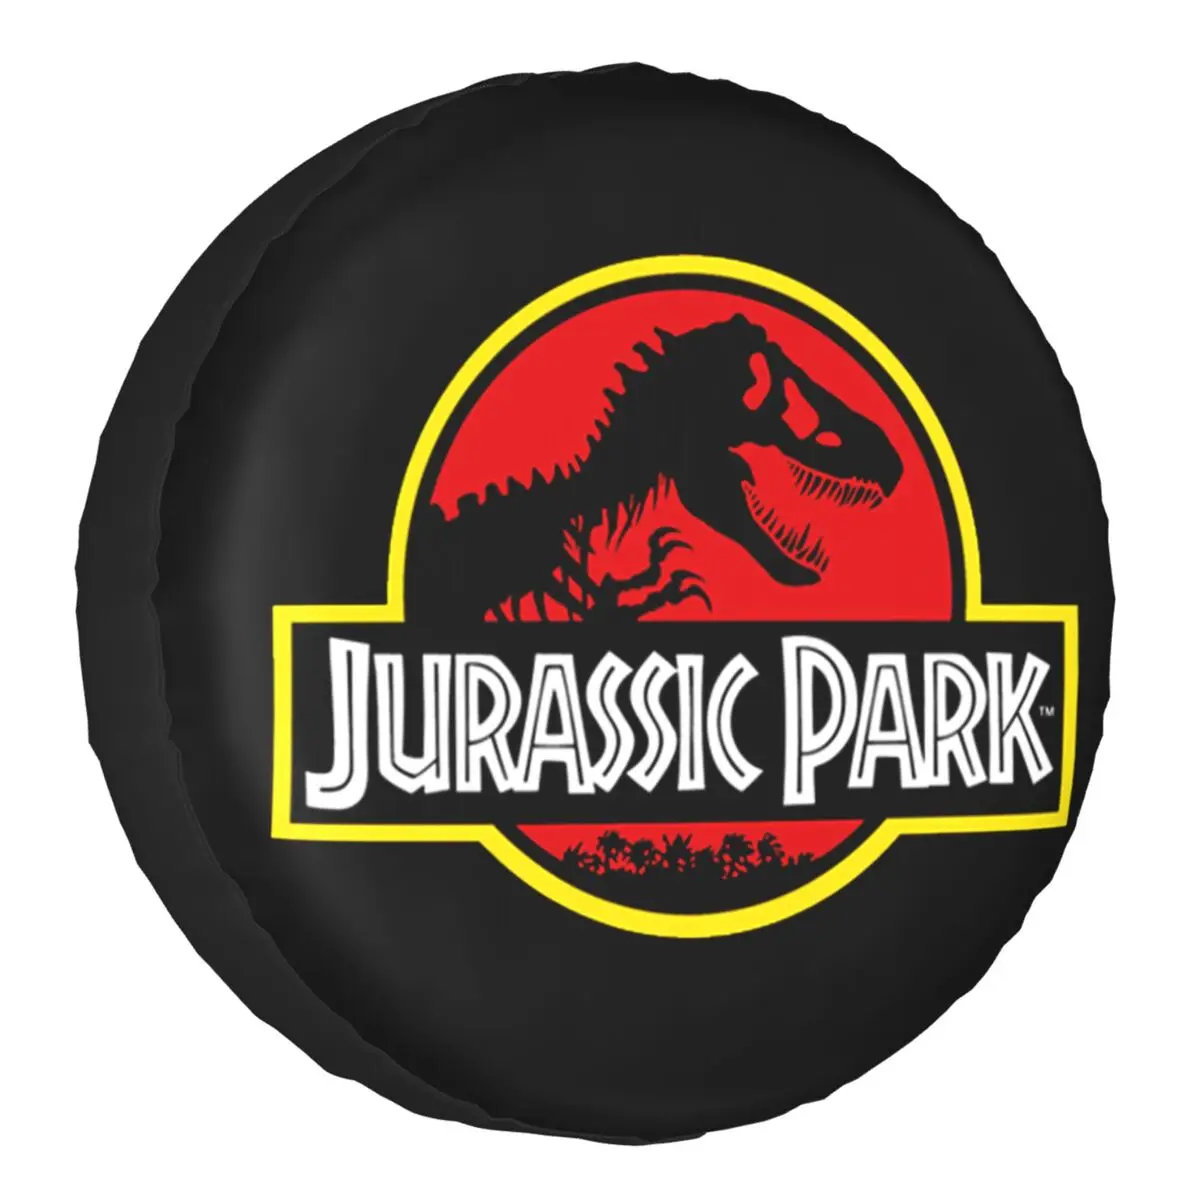 

Jurassic Park Spare Tire Cover Case Bag Pouch Weatherproof Dinosaur World Wheel Covers for Mitsubishi Pajero 14" 15" 16" 17"Inch